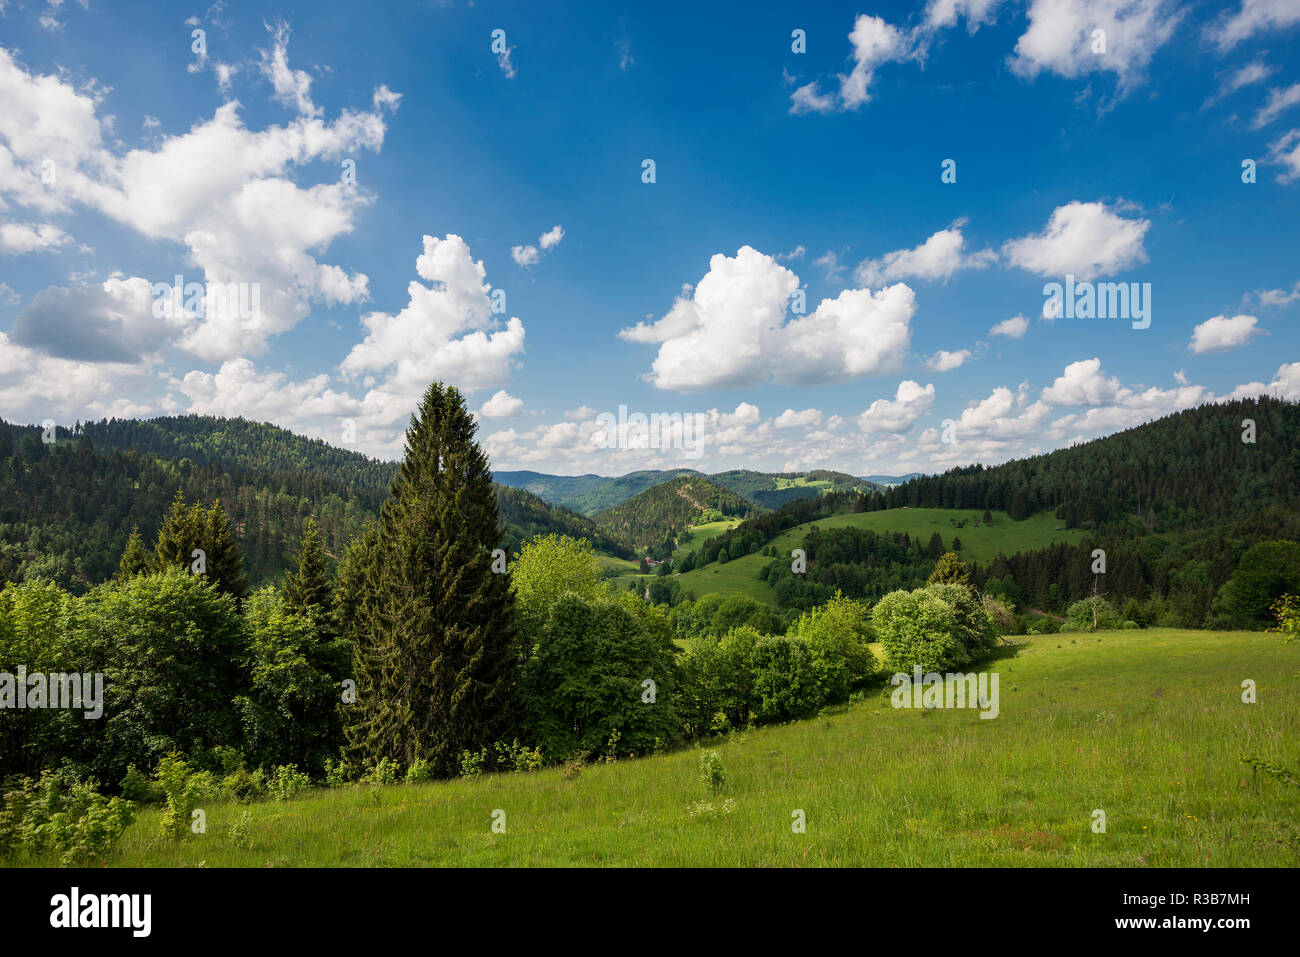 Hilly landscape with meadows and forest, Belchen, Kleines Wiesental, Southern Black Forest, Black Forest, Baden-Württemberg Stock Photo